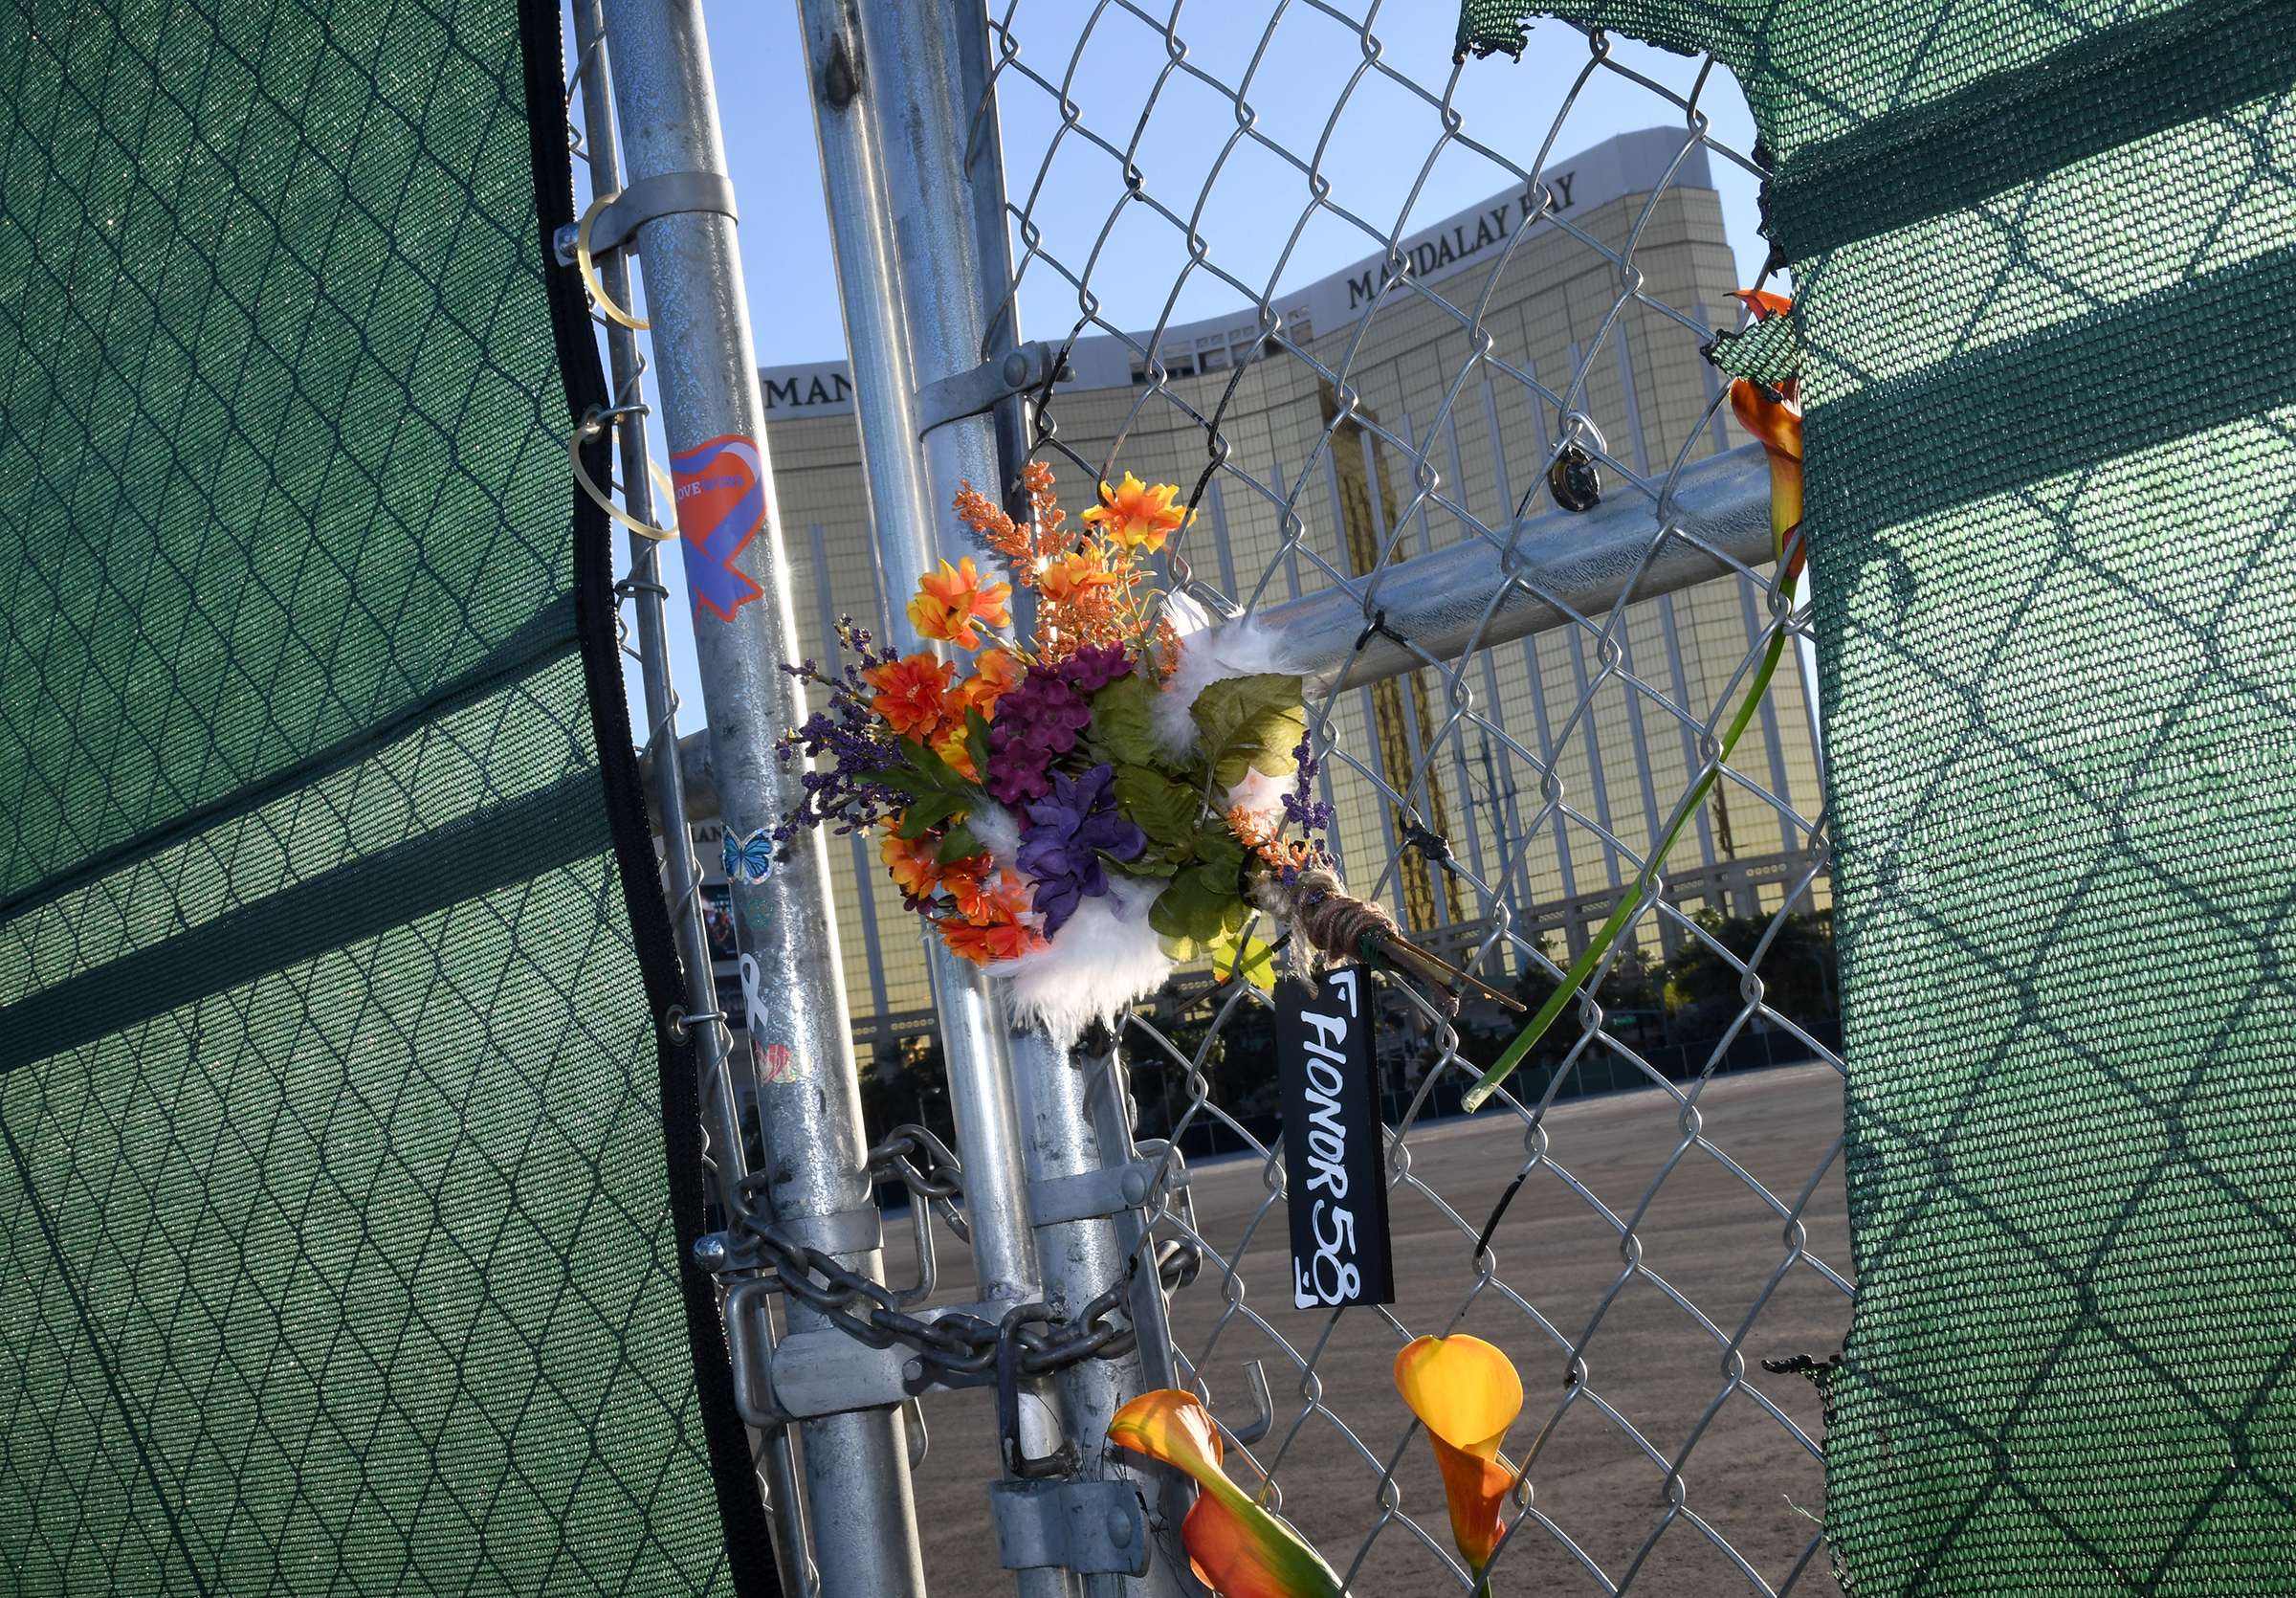 Flowers and a sign hang on a fence  across from Mandalay Bay Resort and Casino as a tribute to those killed almost two years ago in a massacre at the site on Sept. 30, 2019 in Las Vegas (Ethan Miller—Getty Images)